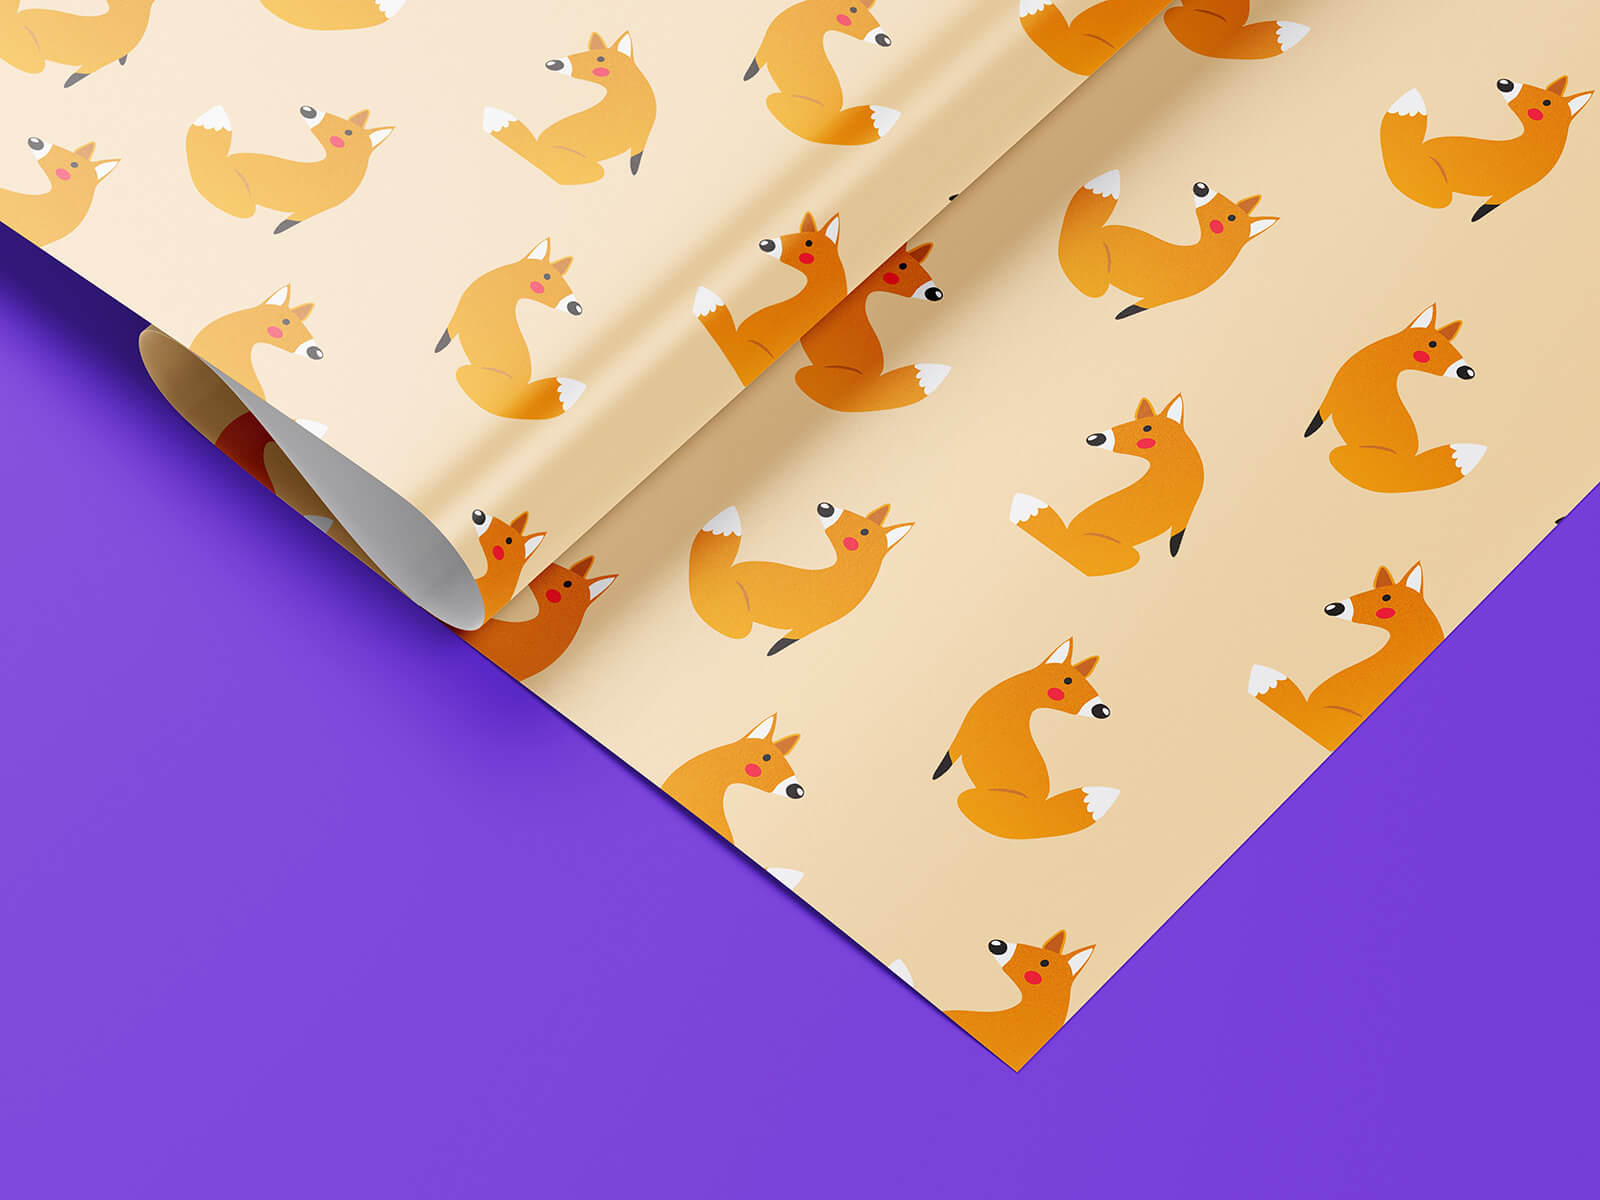  Gift Wrapping Paper Mockup Set